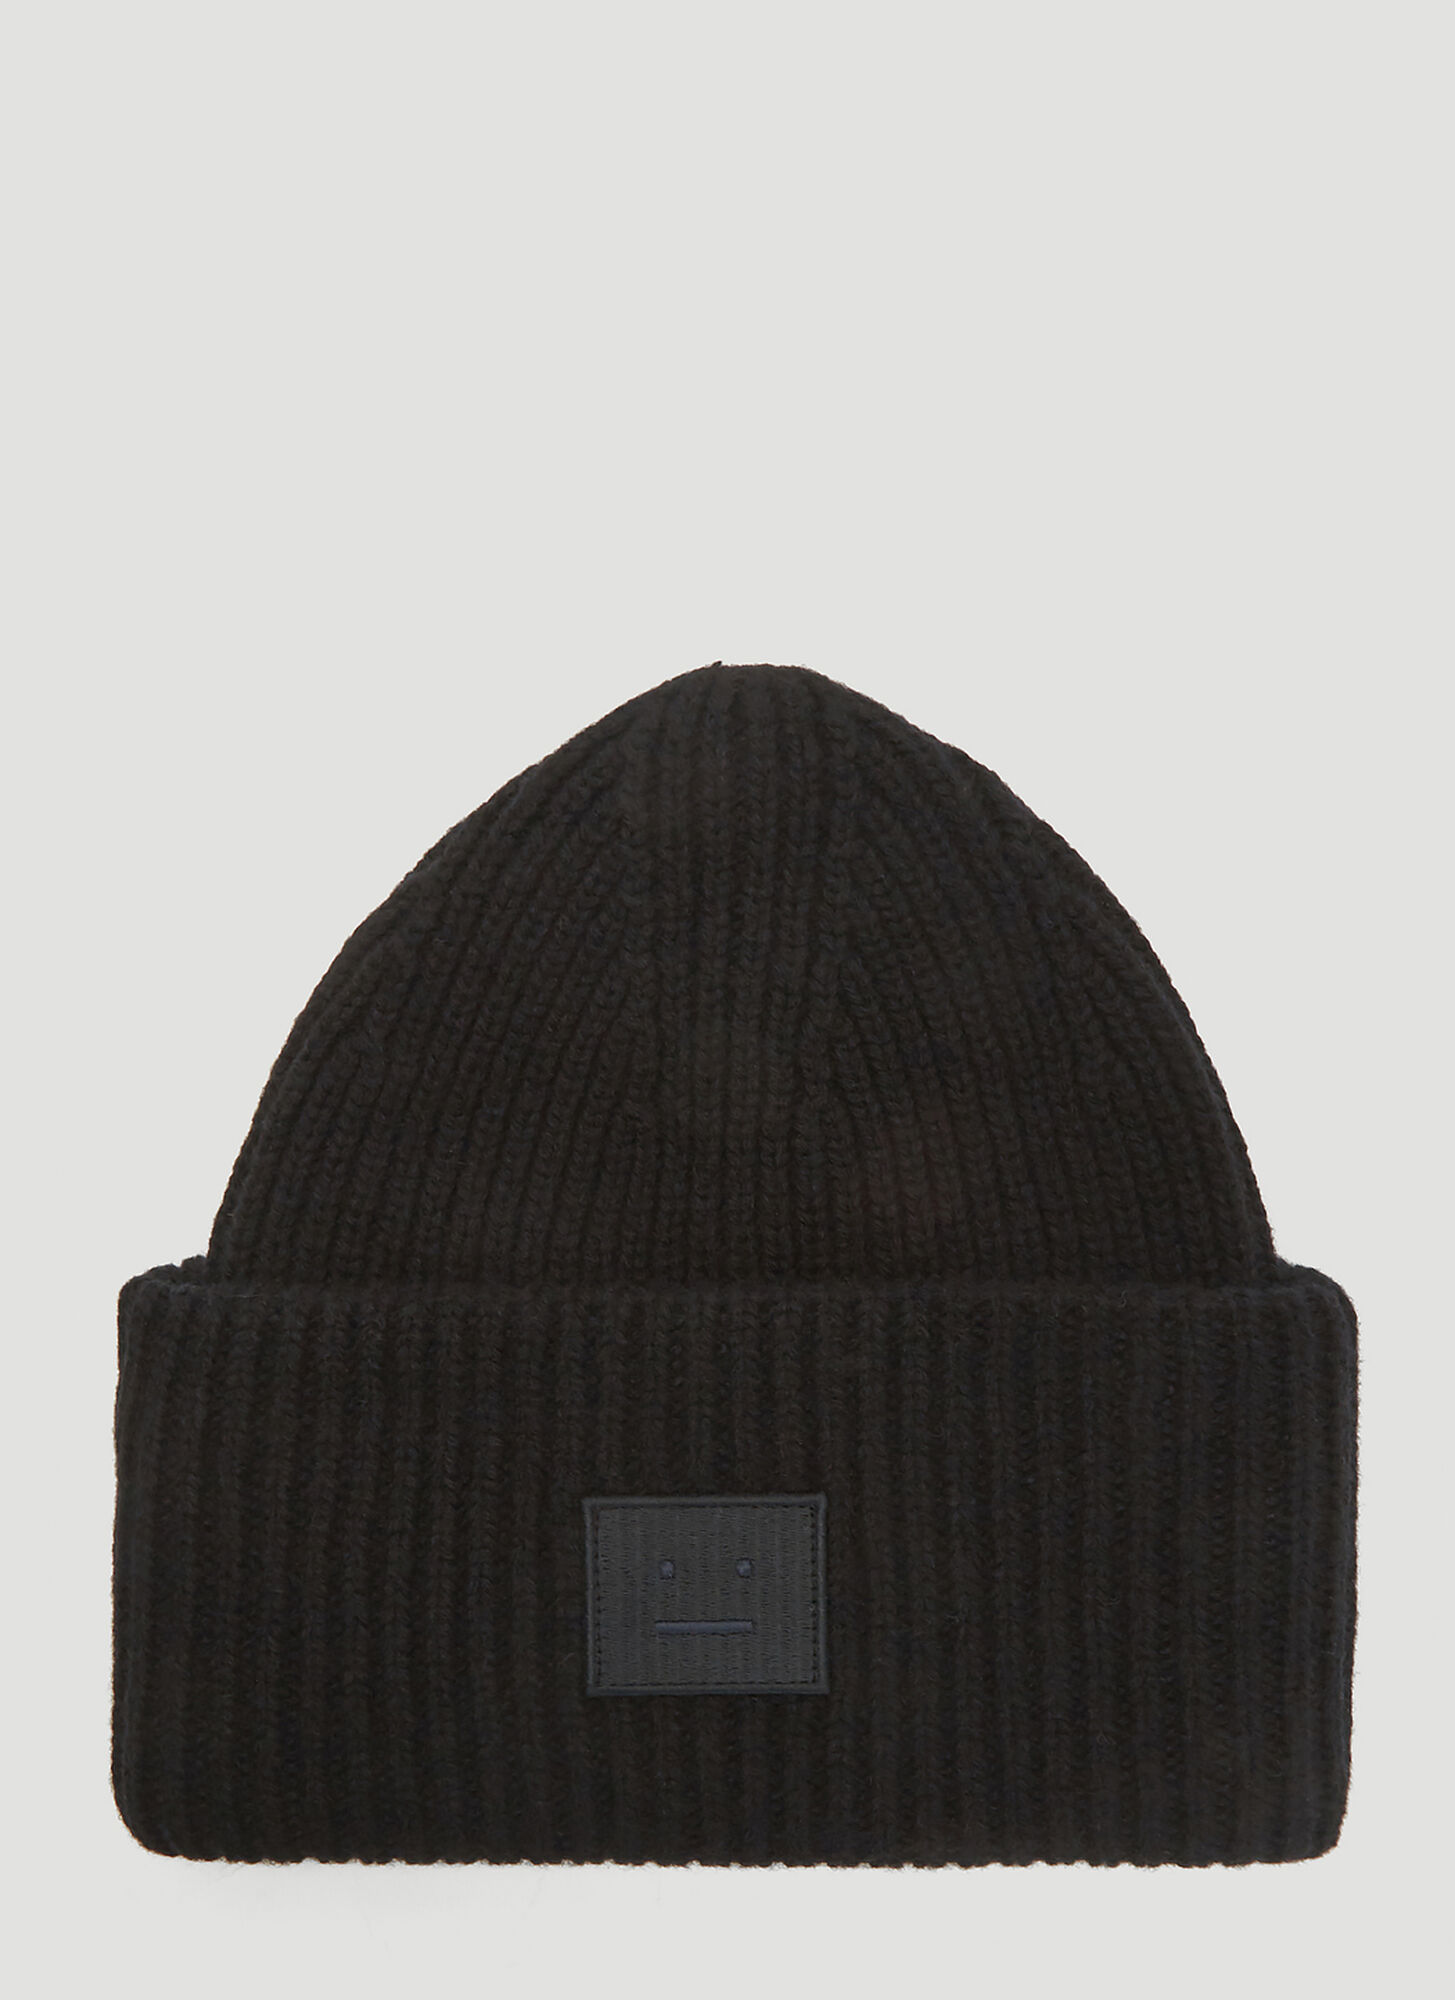 Acne Studios Pansy N Face Knit Hat in Black size One Size | The Fashionisto